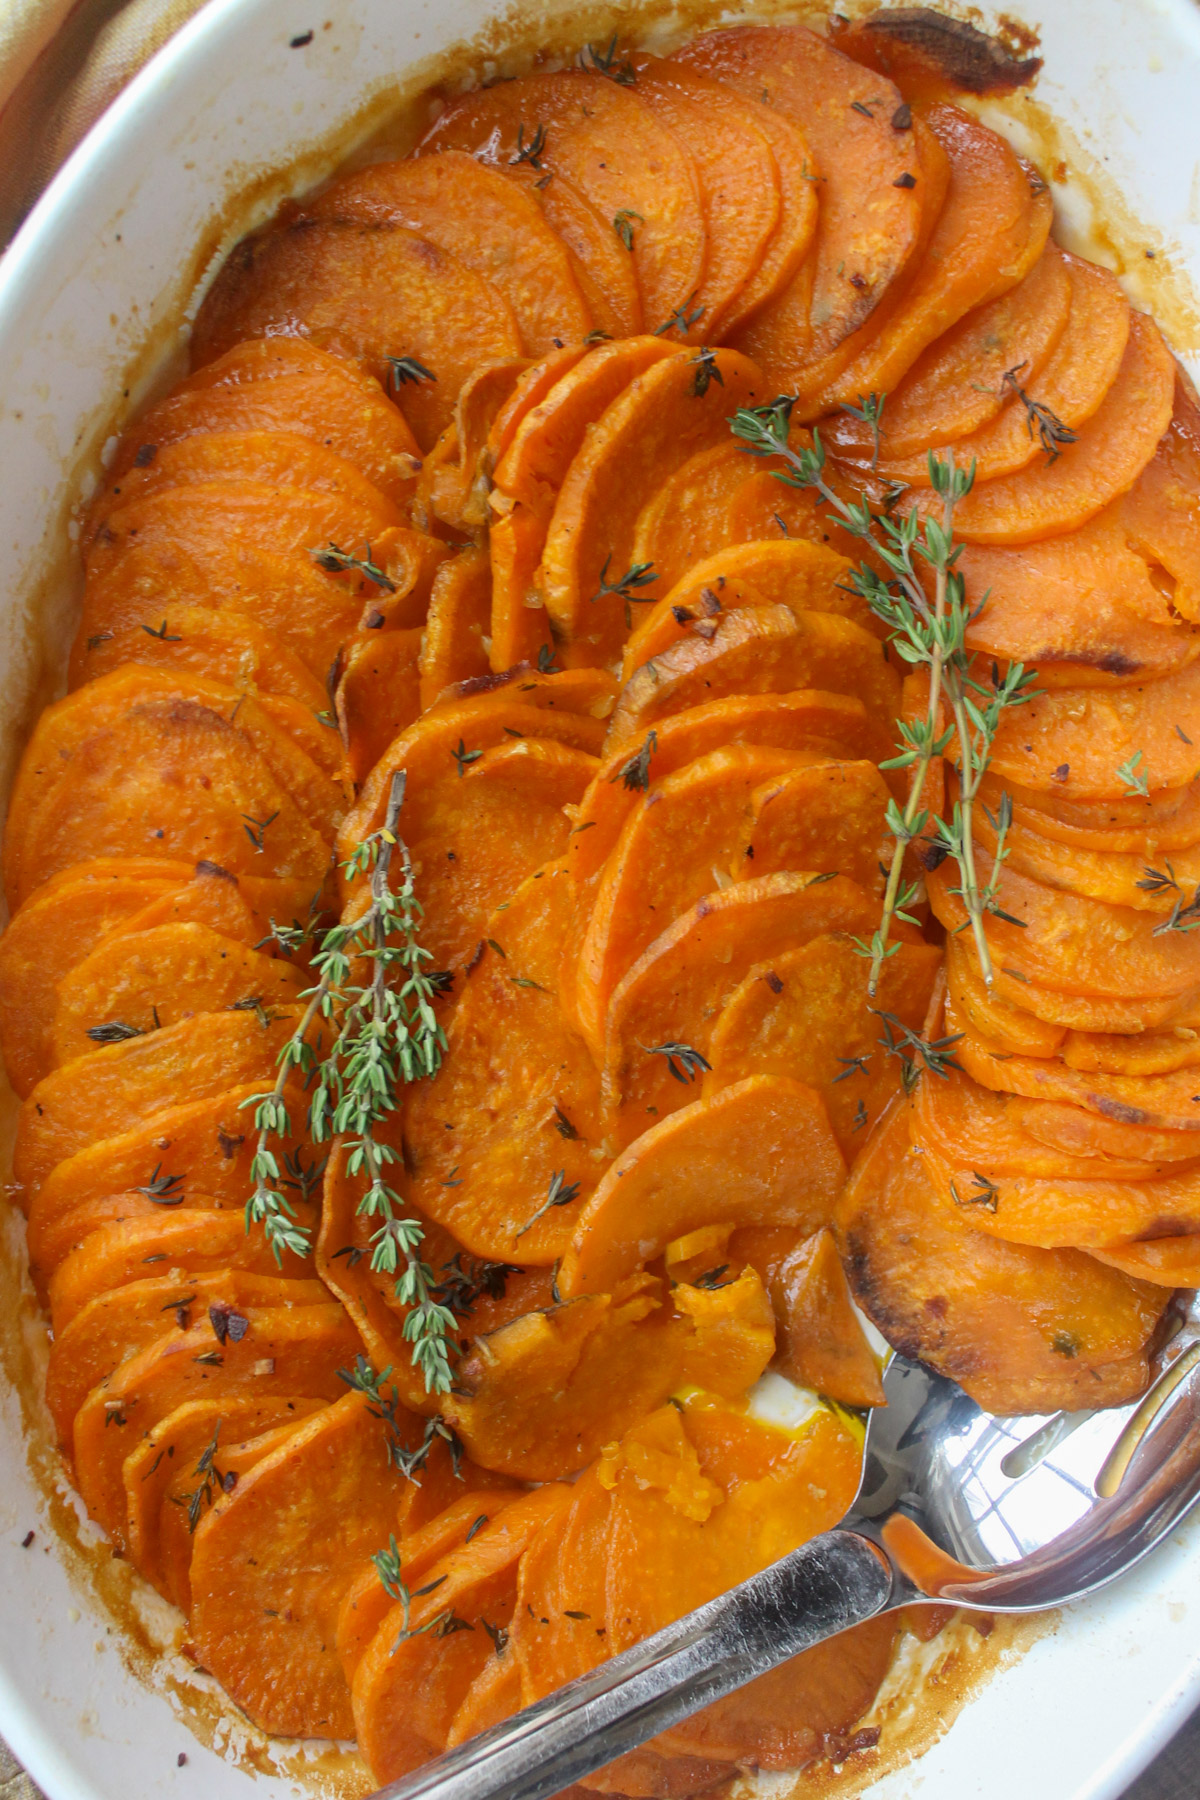 Oven roasted sweet potato slices in garlic honey butter with fresh thyme.